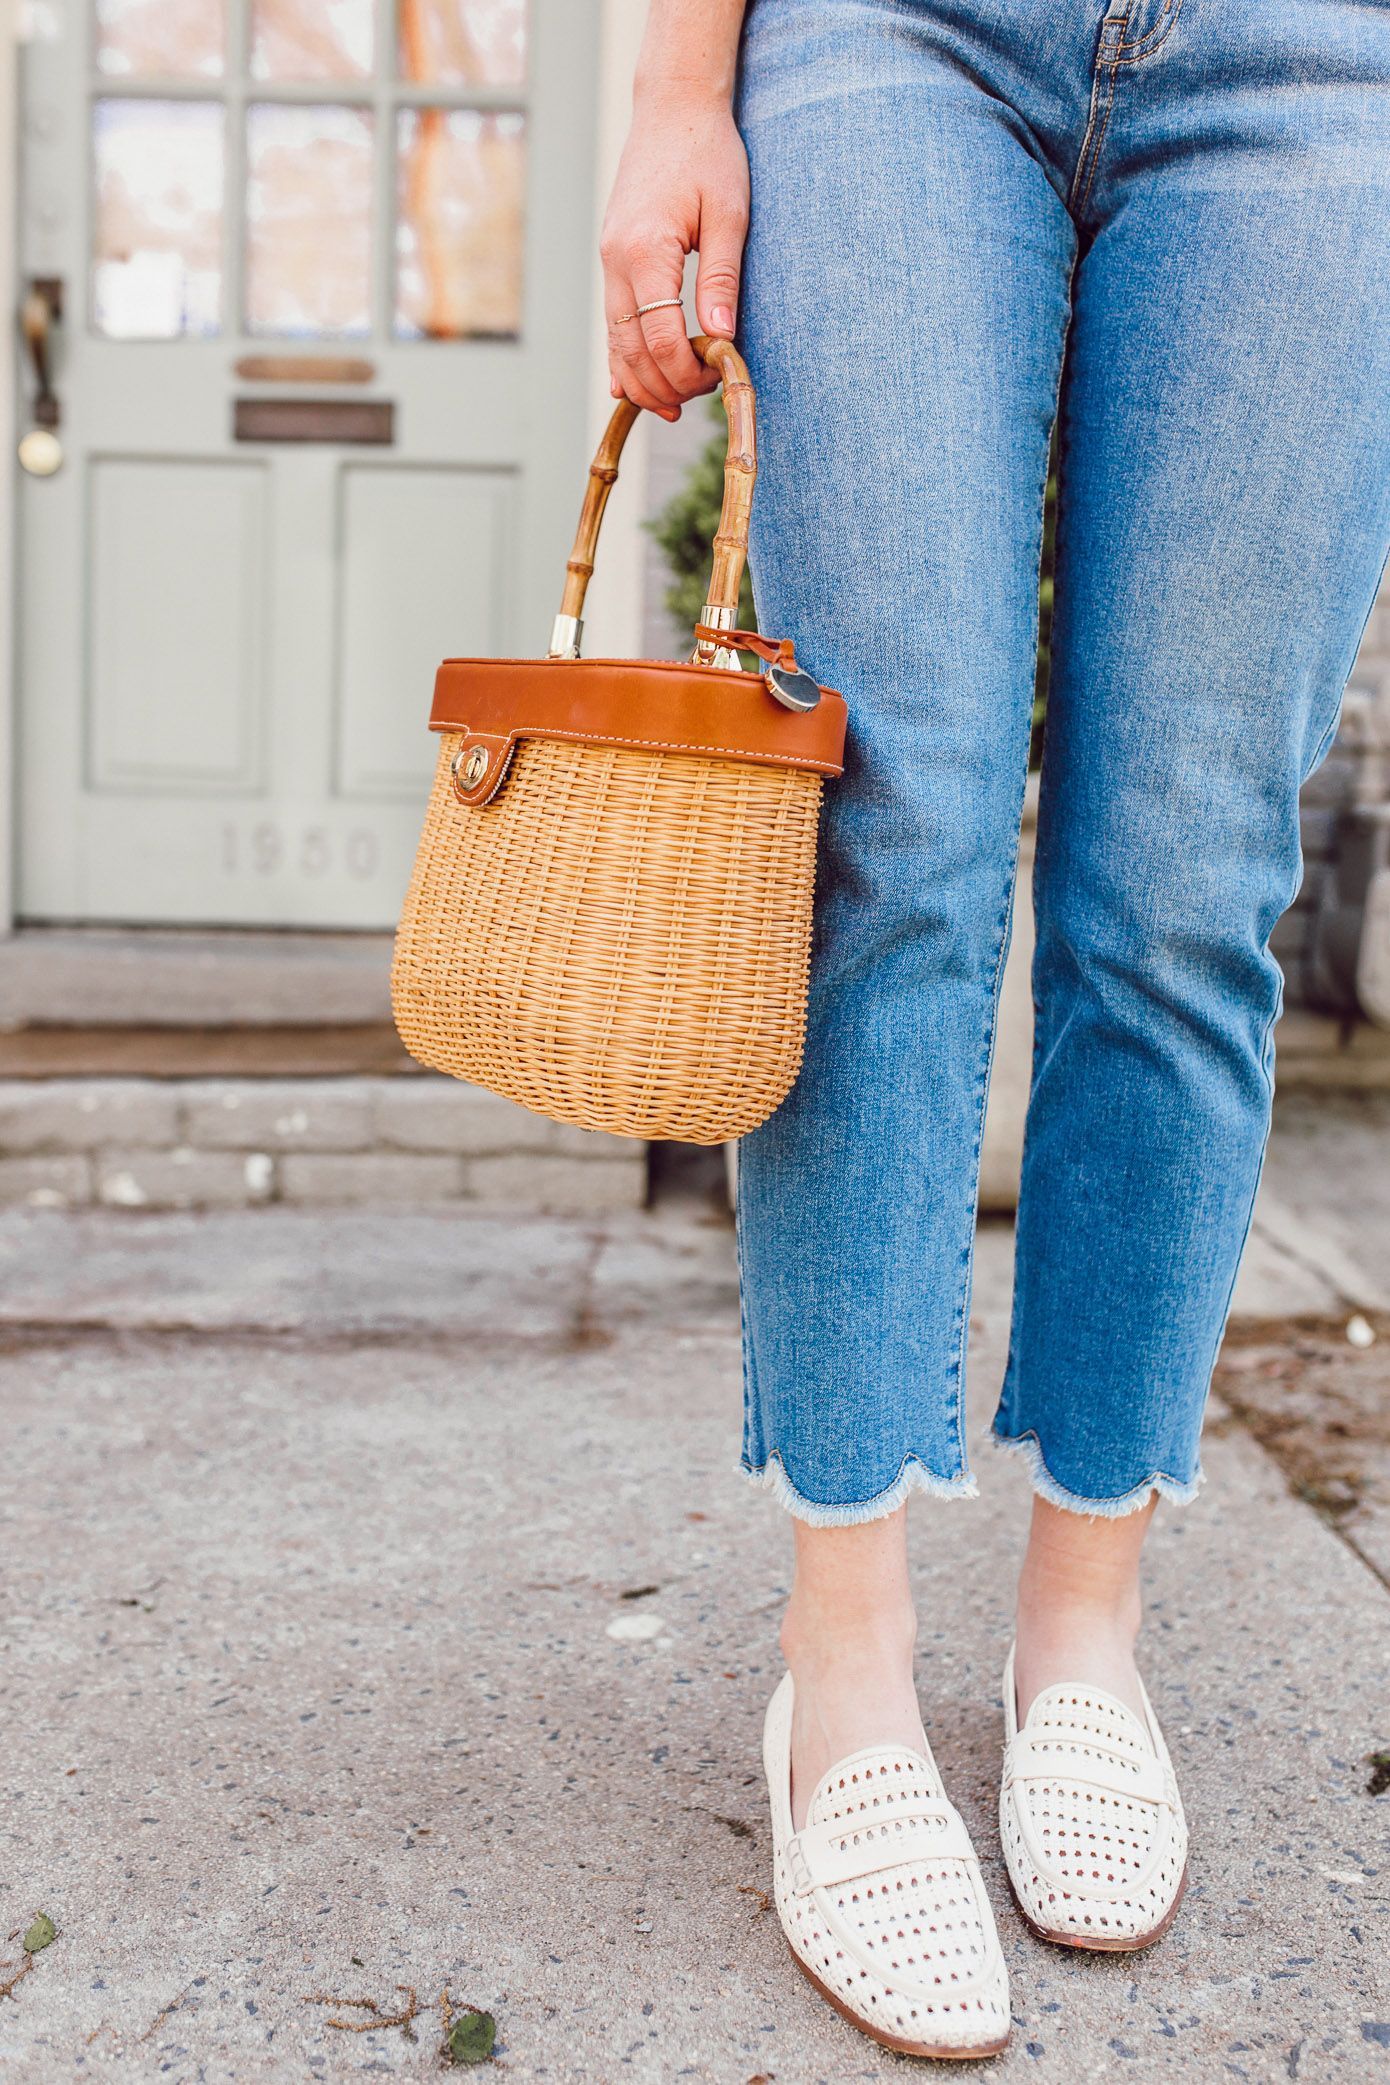 My Everyday Look with Scalloped Hem Jeans | Louella Reese -   everyday style 2019